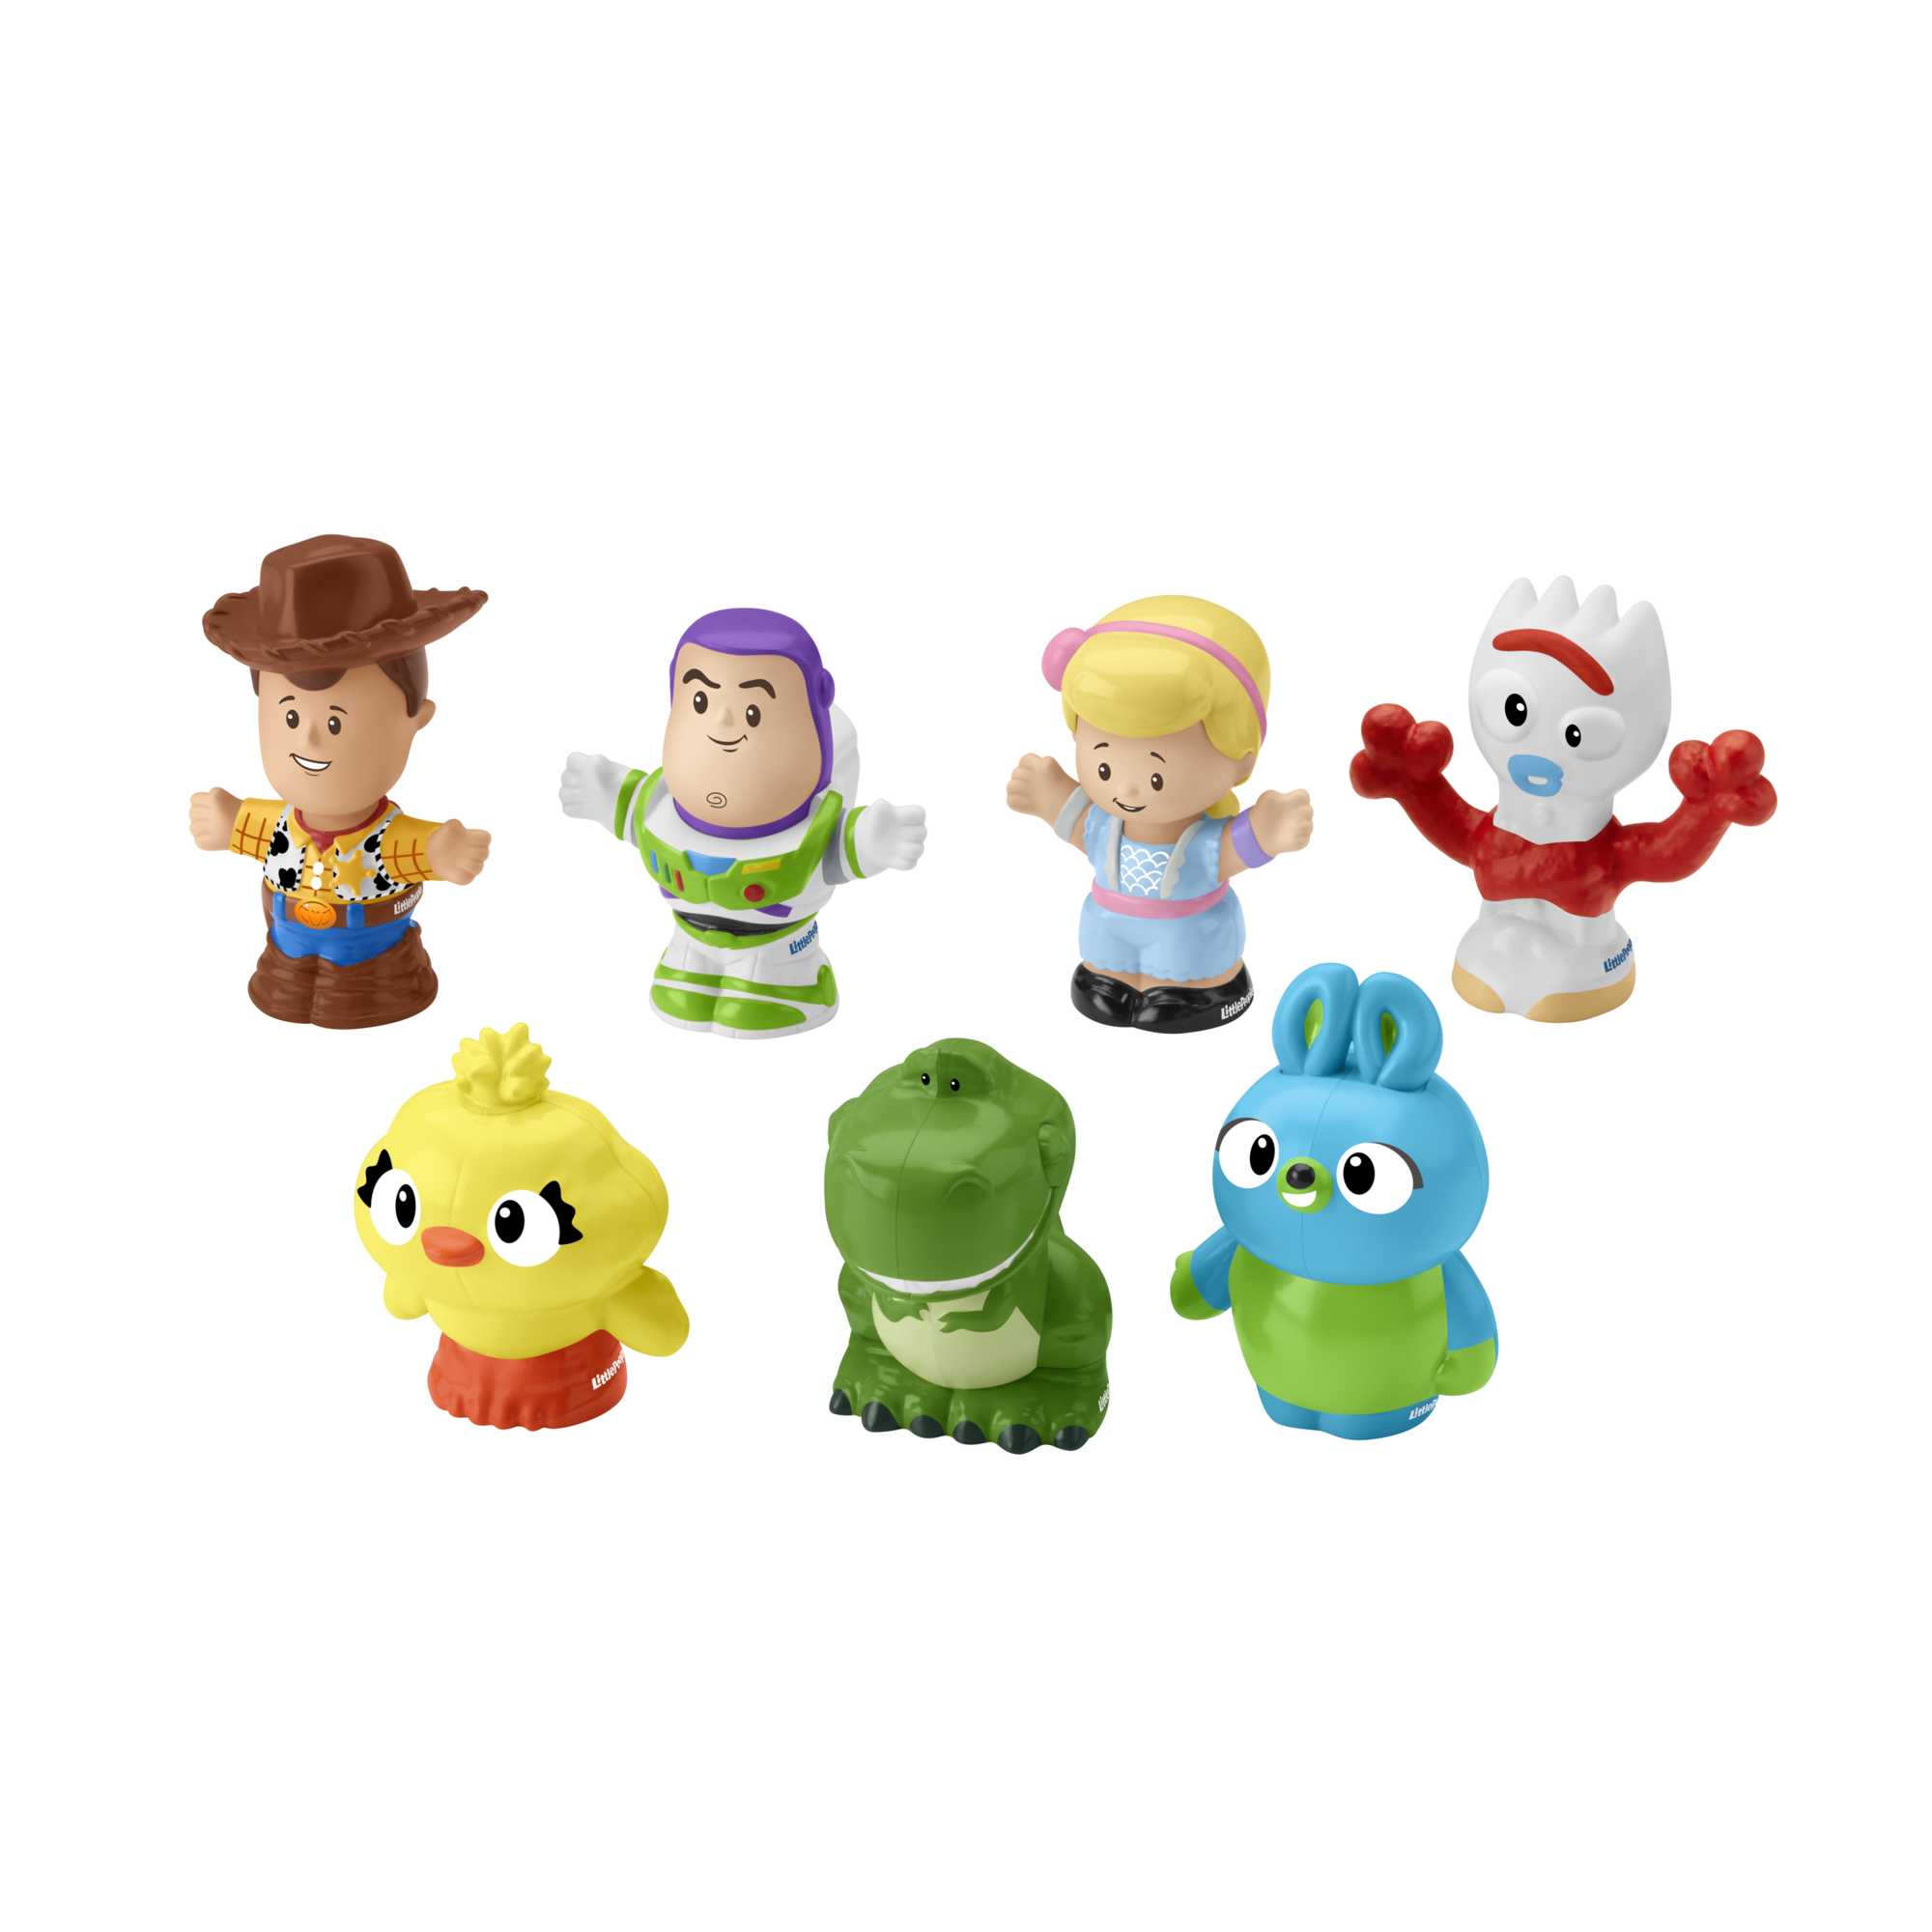 Little People Disney Toy Story 4 7 Friends Pack By